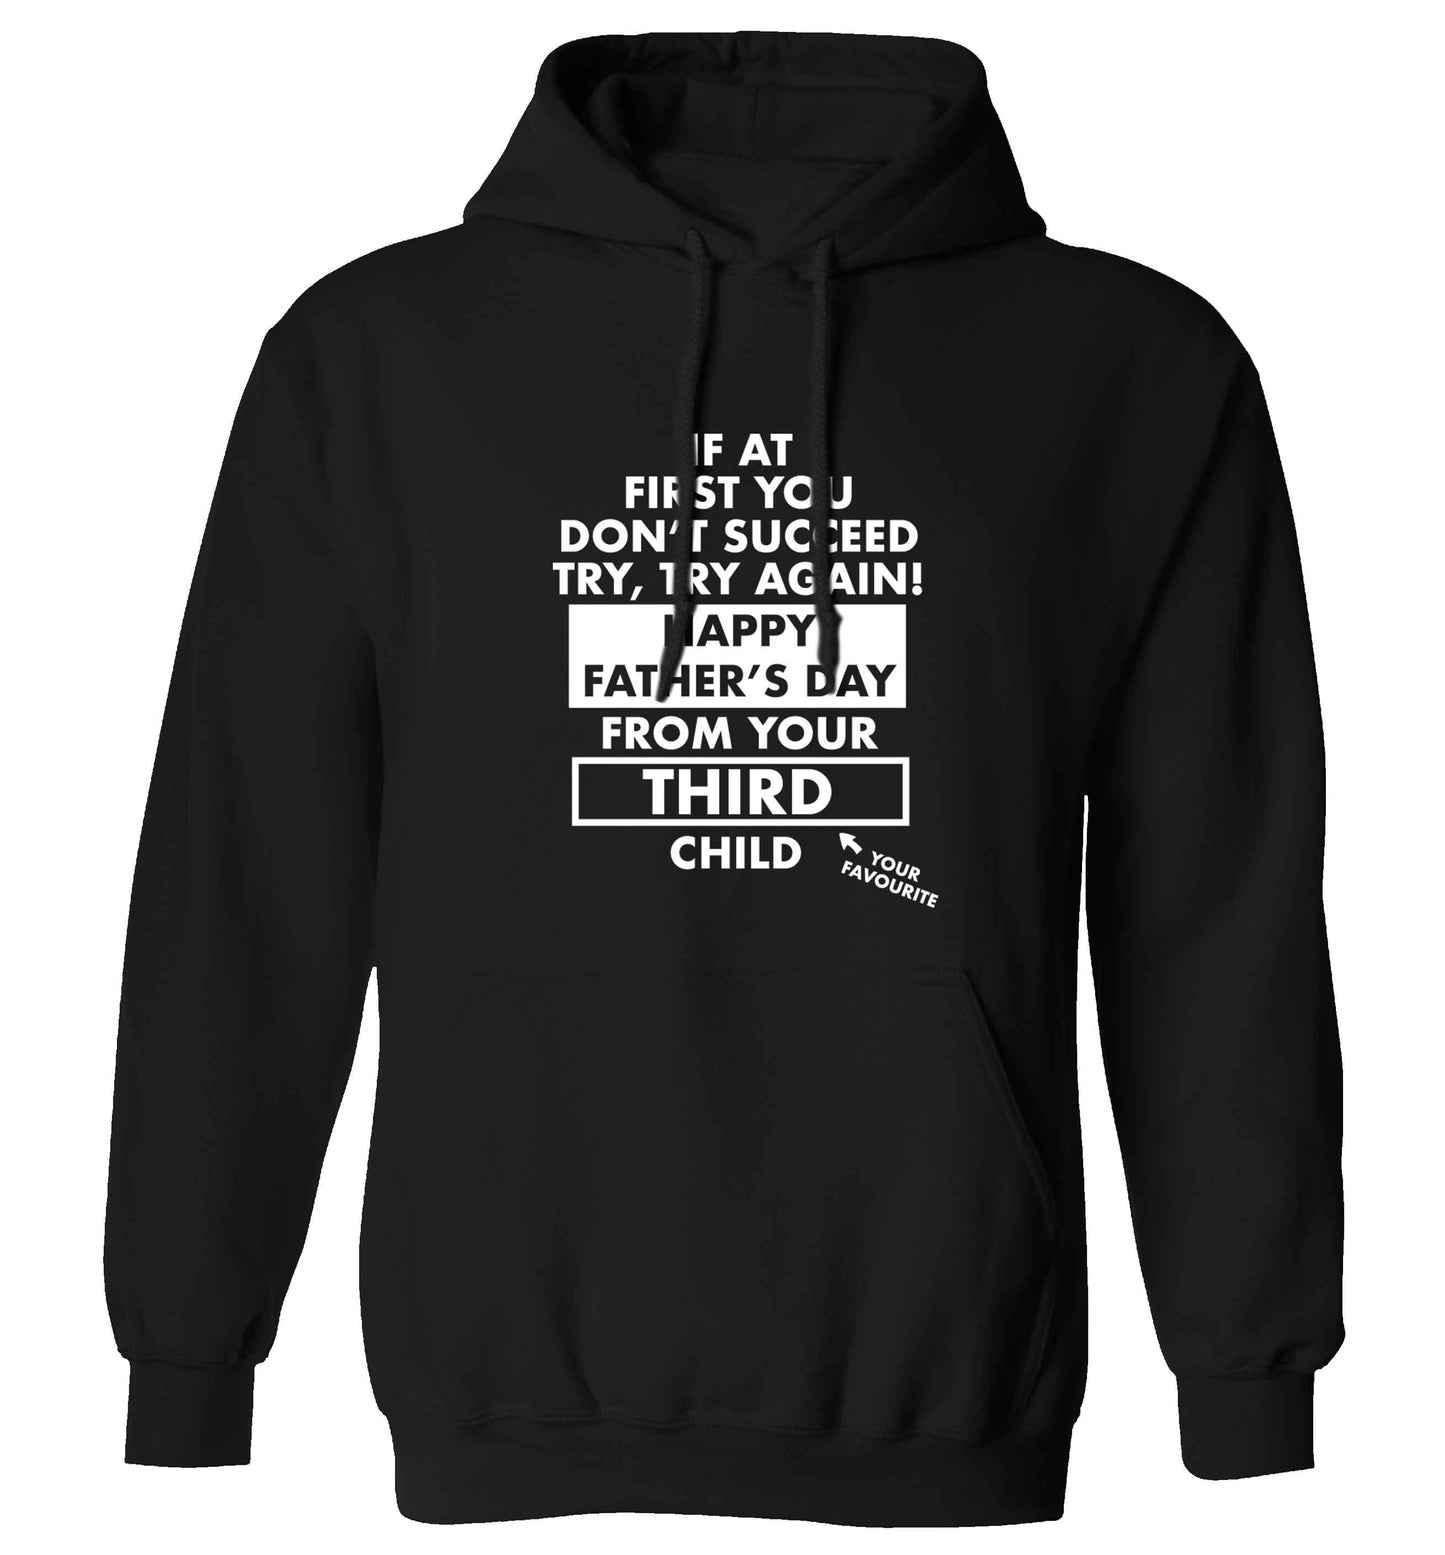 If at first you don't succeed try, try again Happy Father's day from your third child! adults unisex black hoodie 2XL